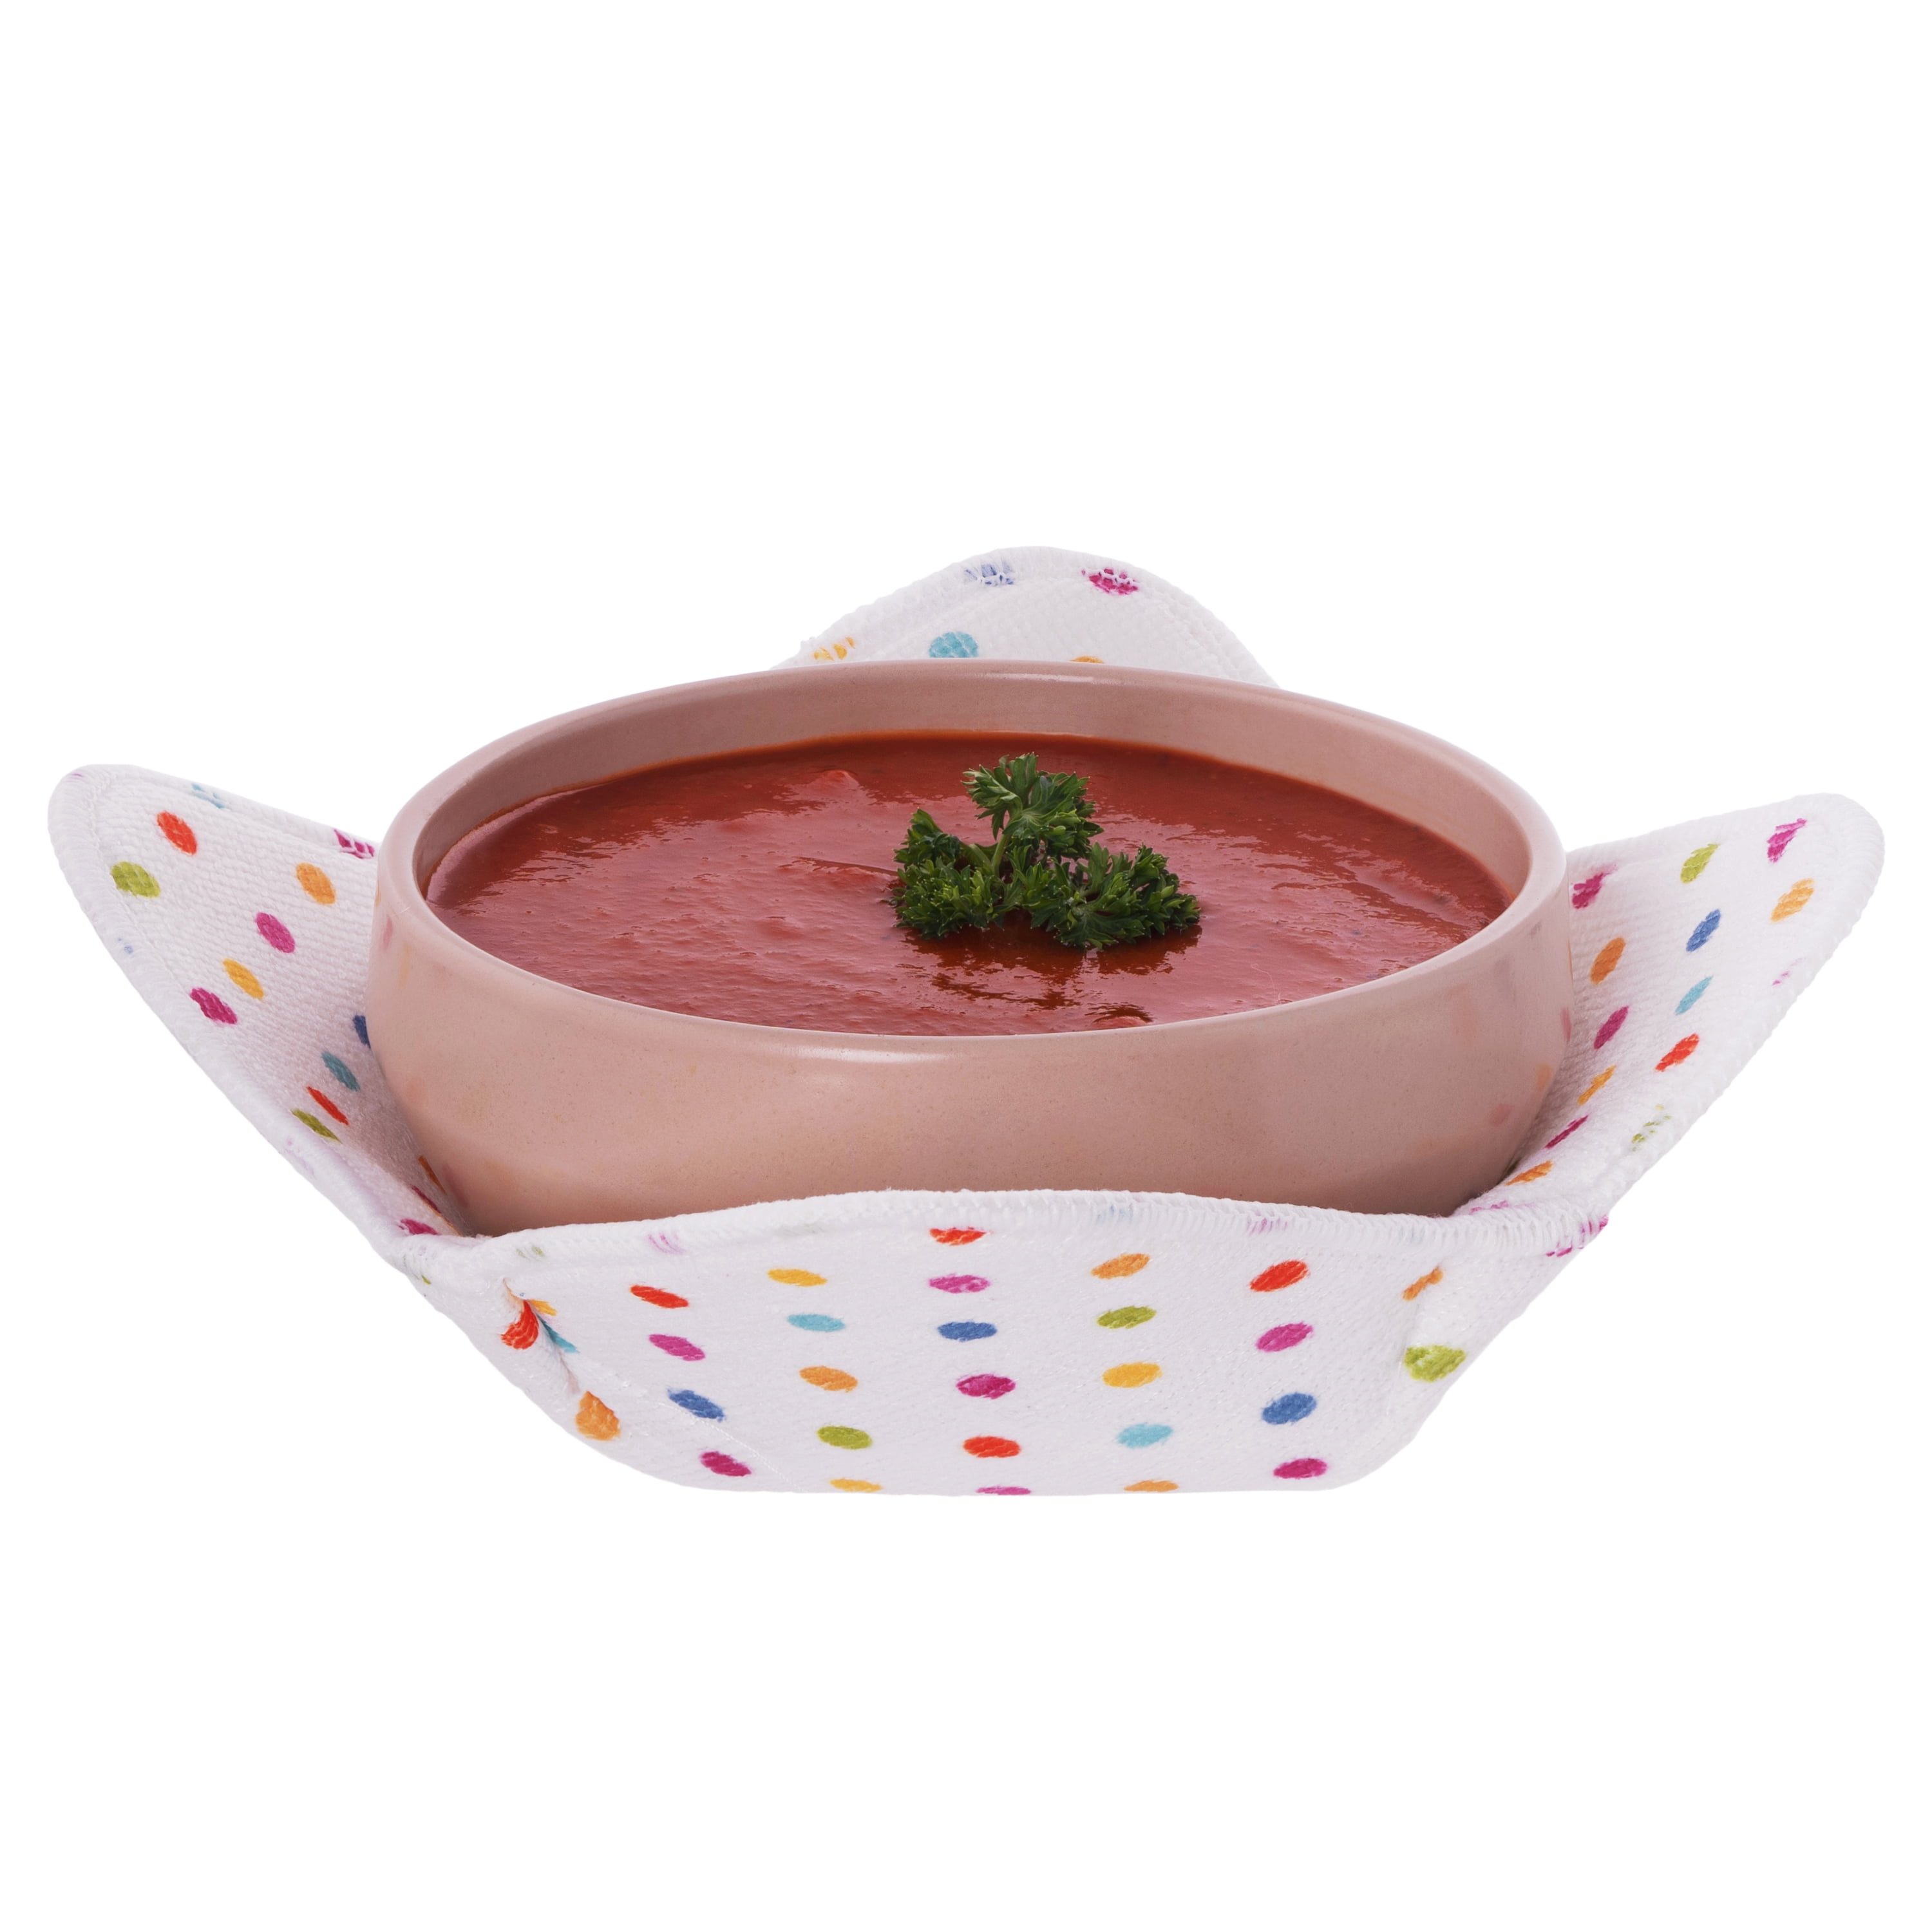  12 Pieces Microwave Safe Bowl Holders Polyester Hot Bowl Holder  Protect Your Hands from Hot Dishes for Heating Soup, Leftover Food, Meals  (Red) : Home & Kitchen